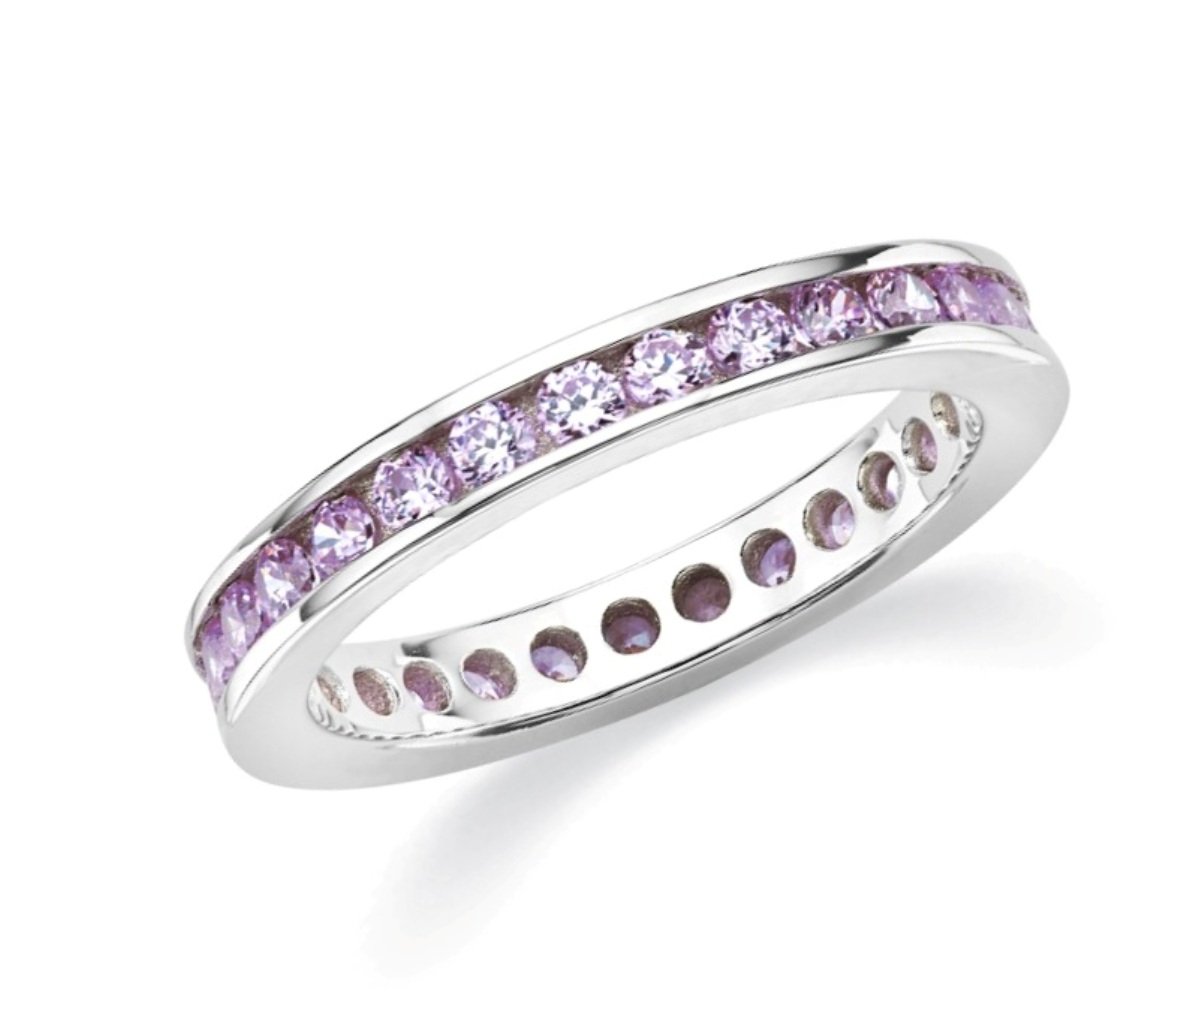 Periwinkle Passion CZ Eternity Band Ring, Rhodium Plated Sterling Silver